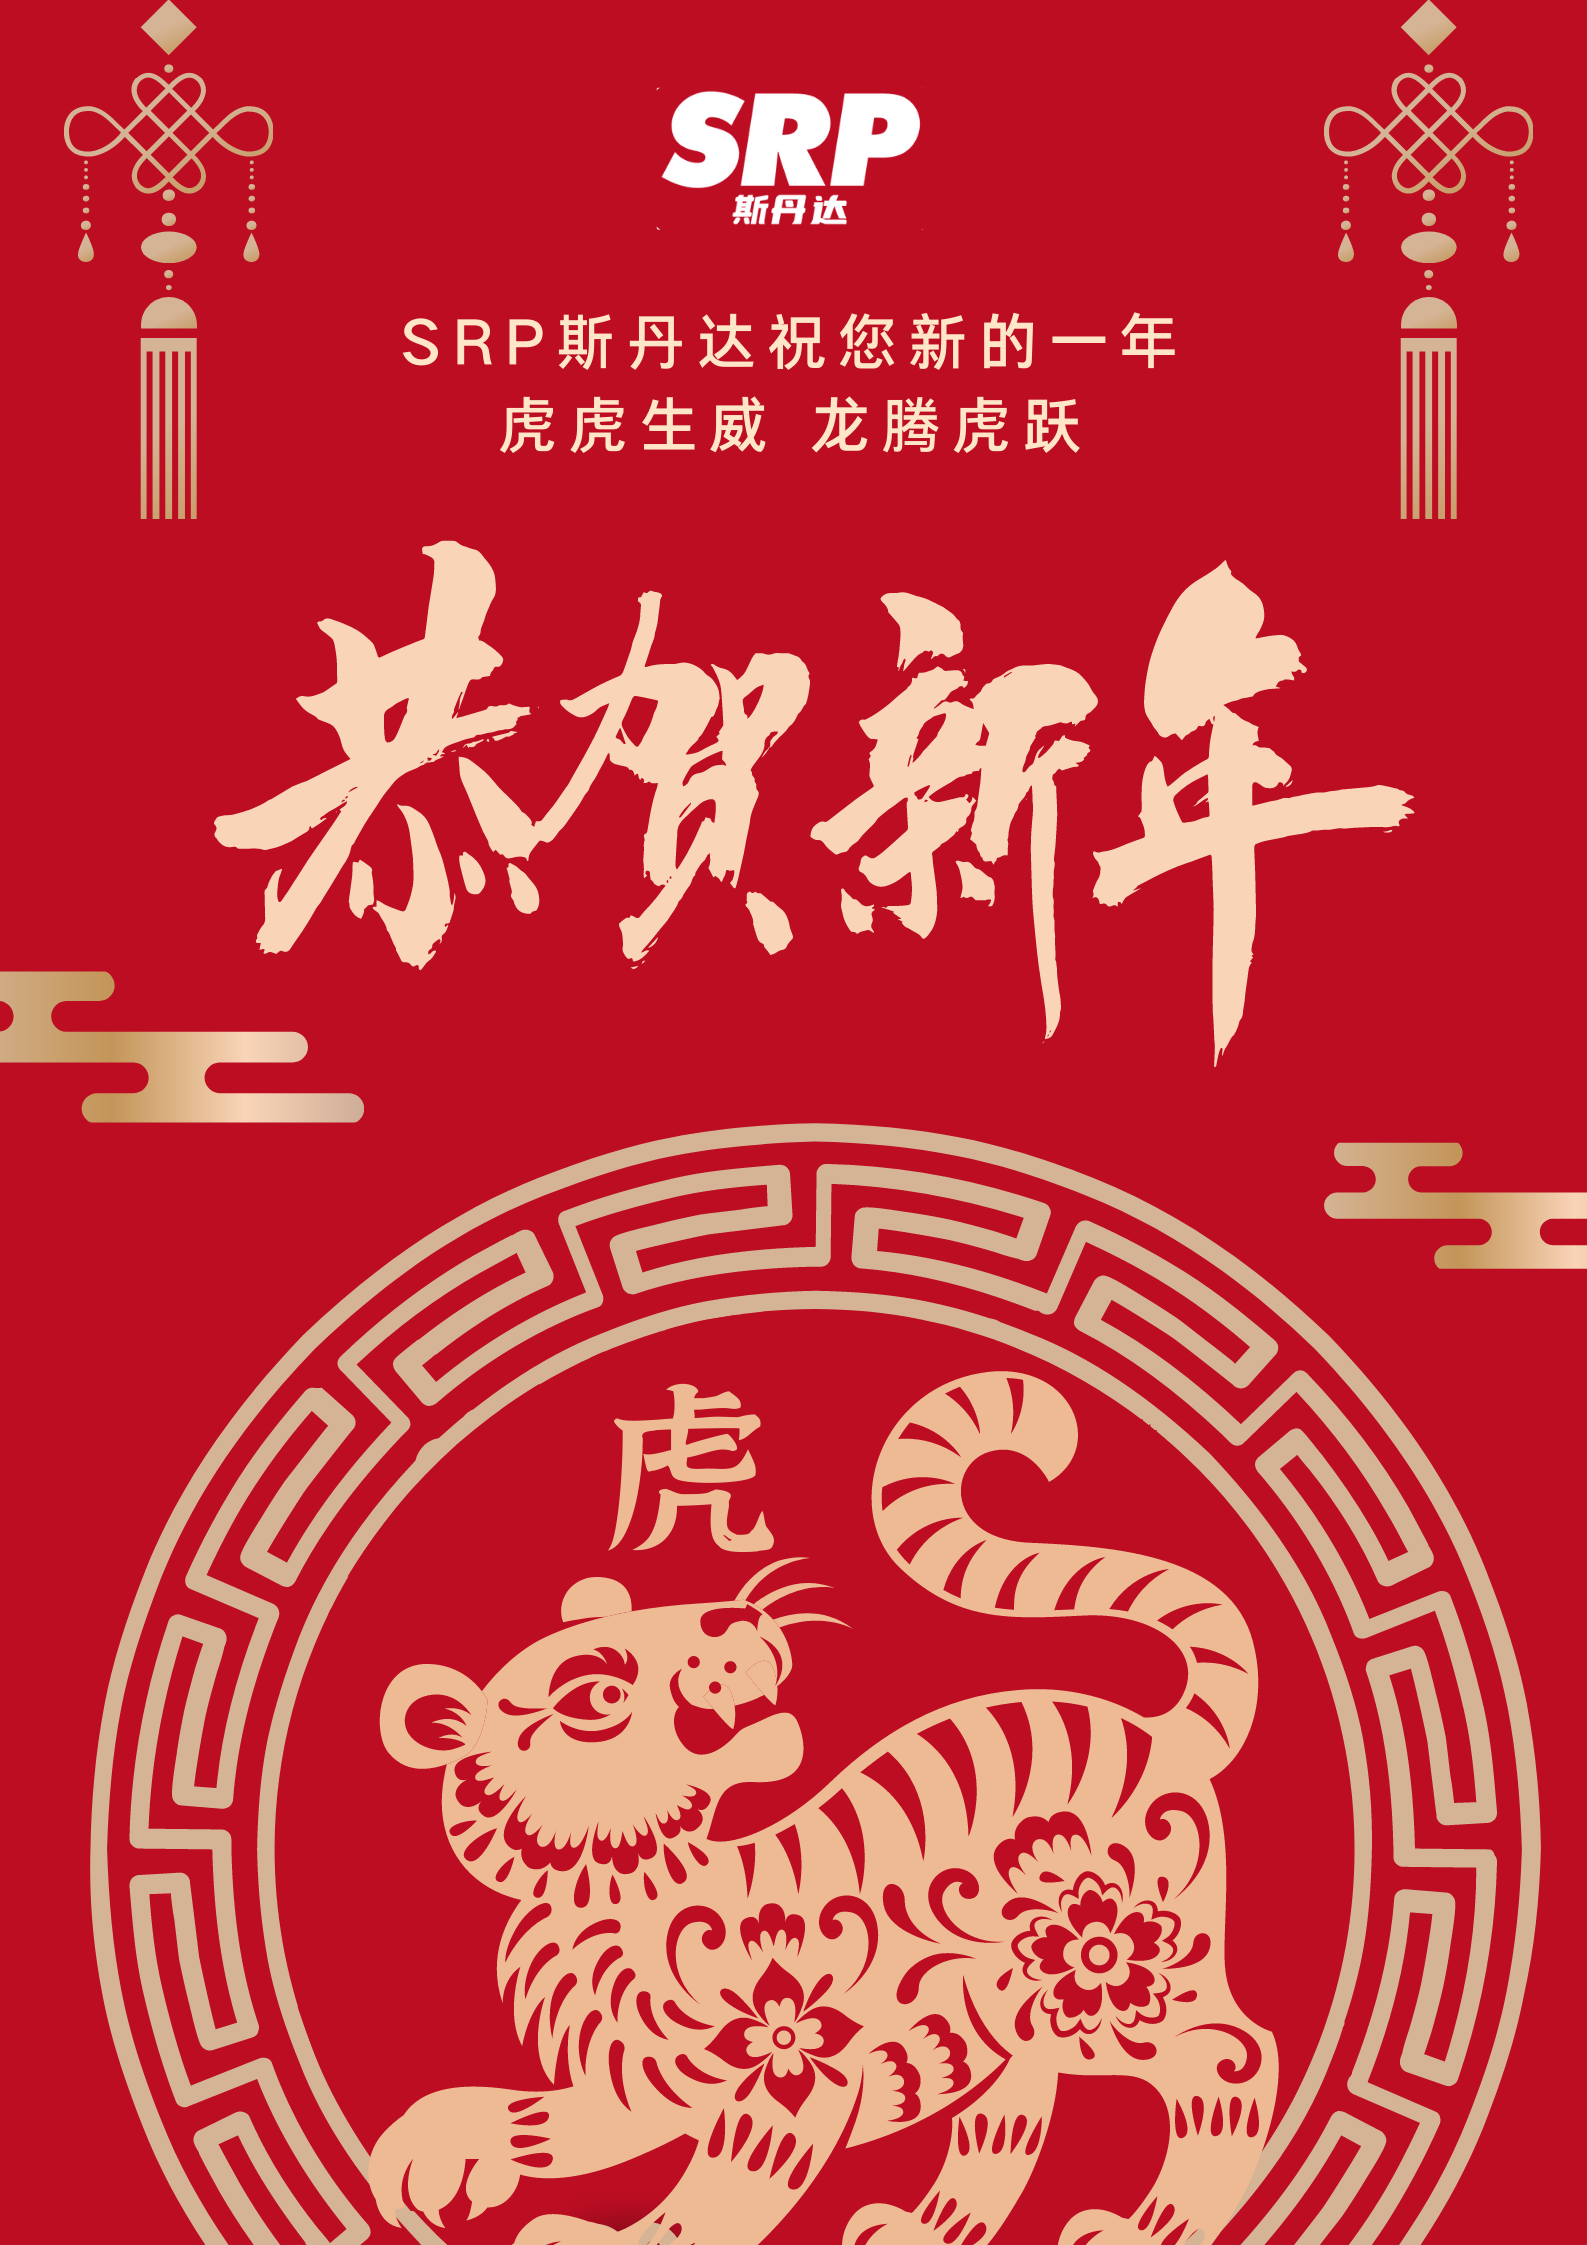 BEST WISHES FROM SRP ZHUHAI FOR THE TIGER YEAR